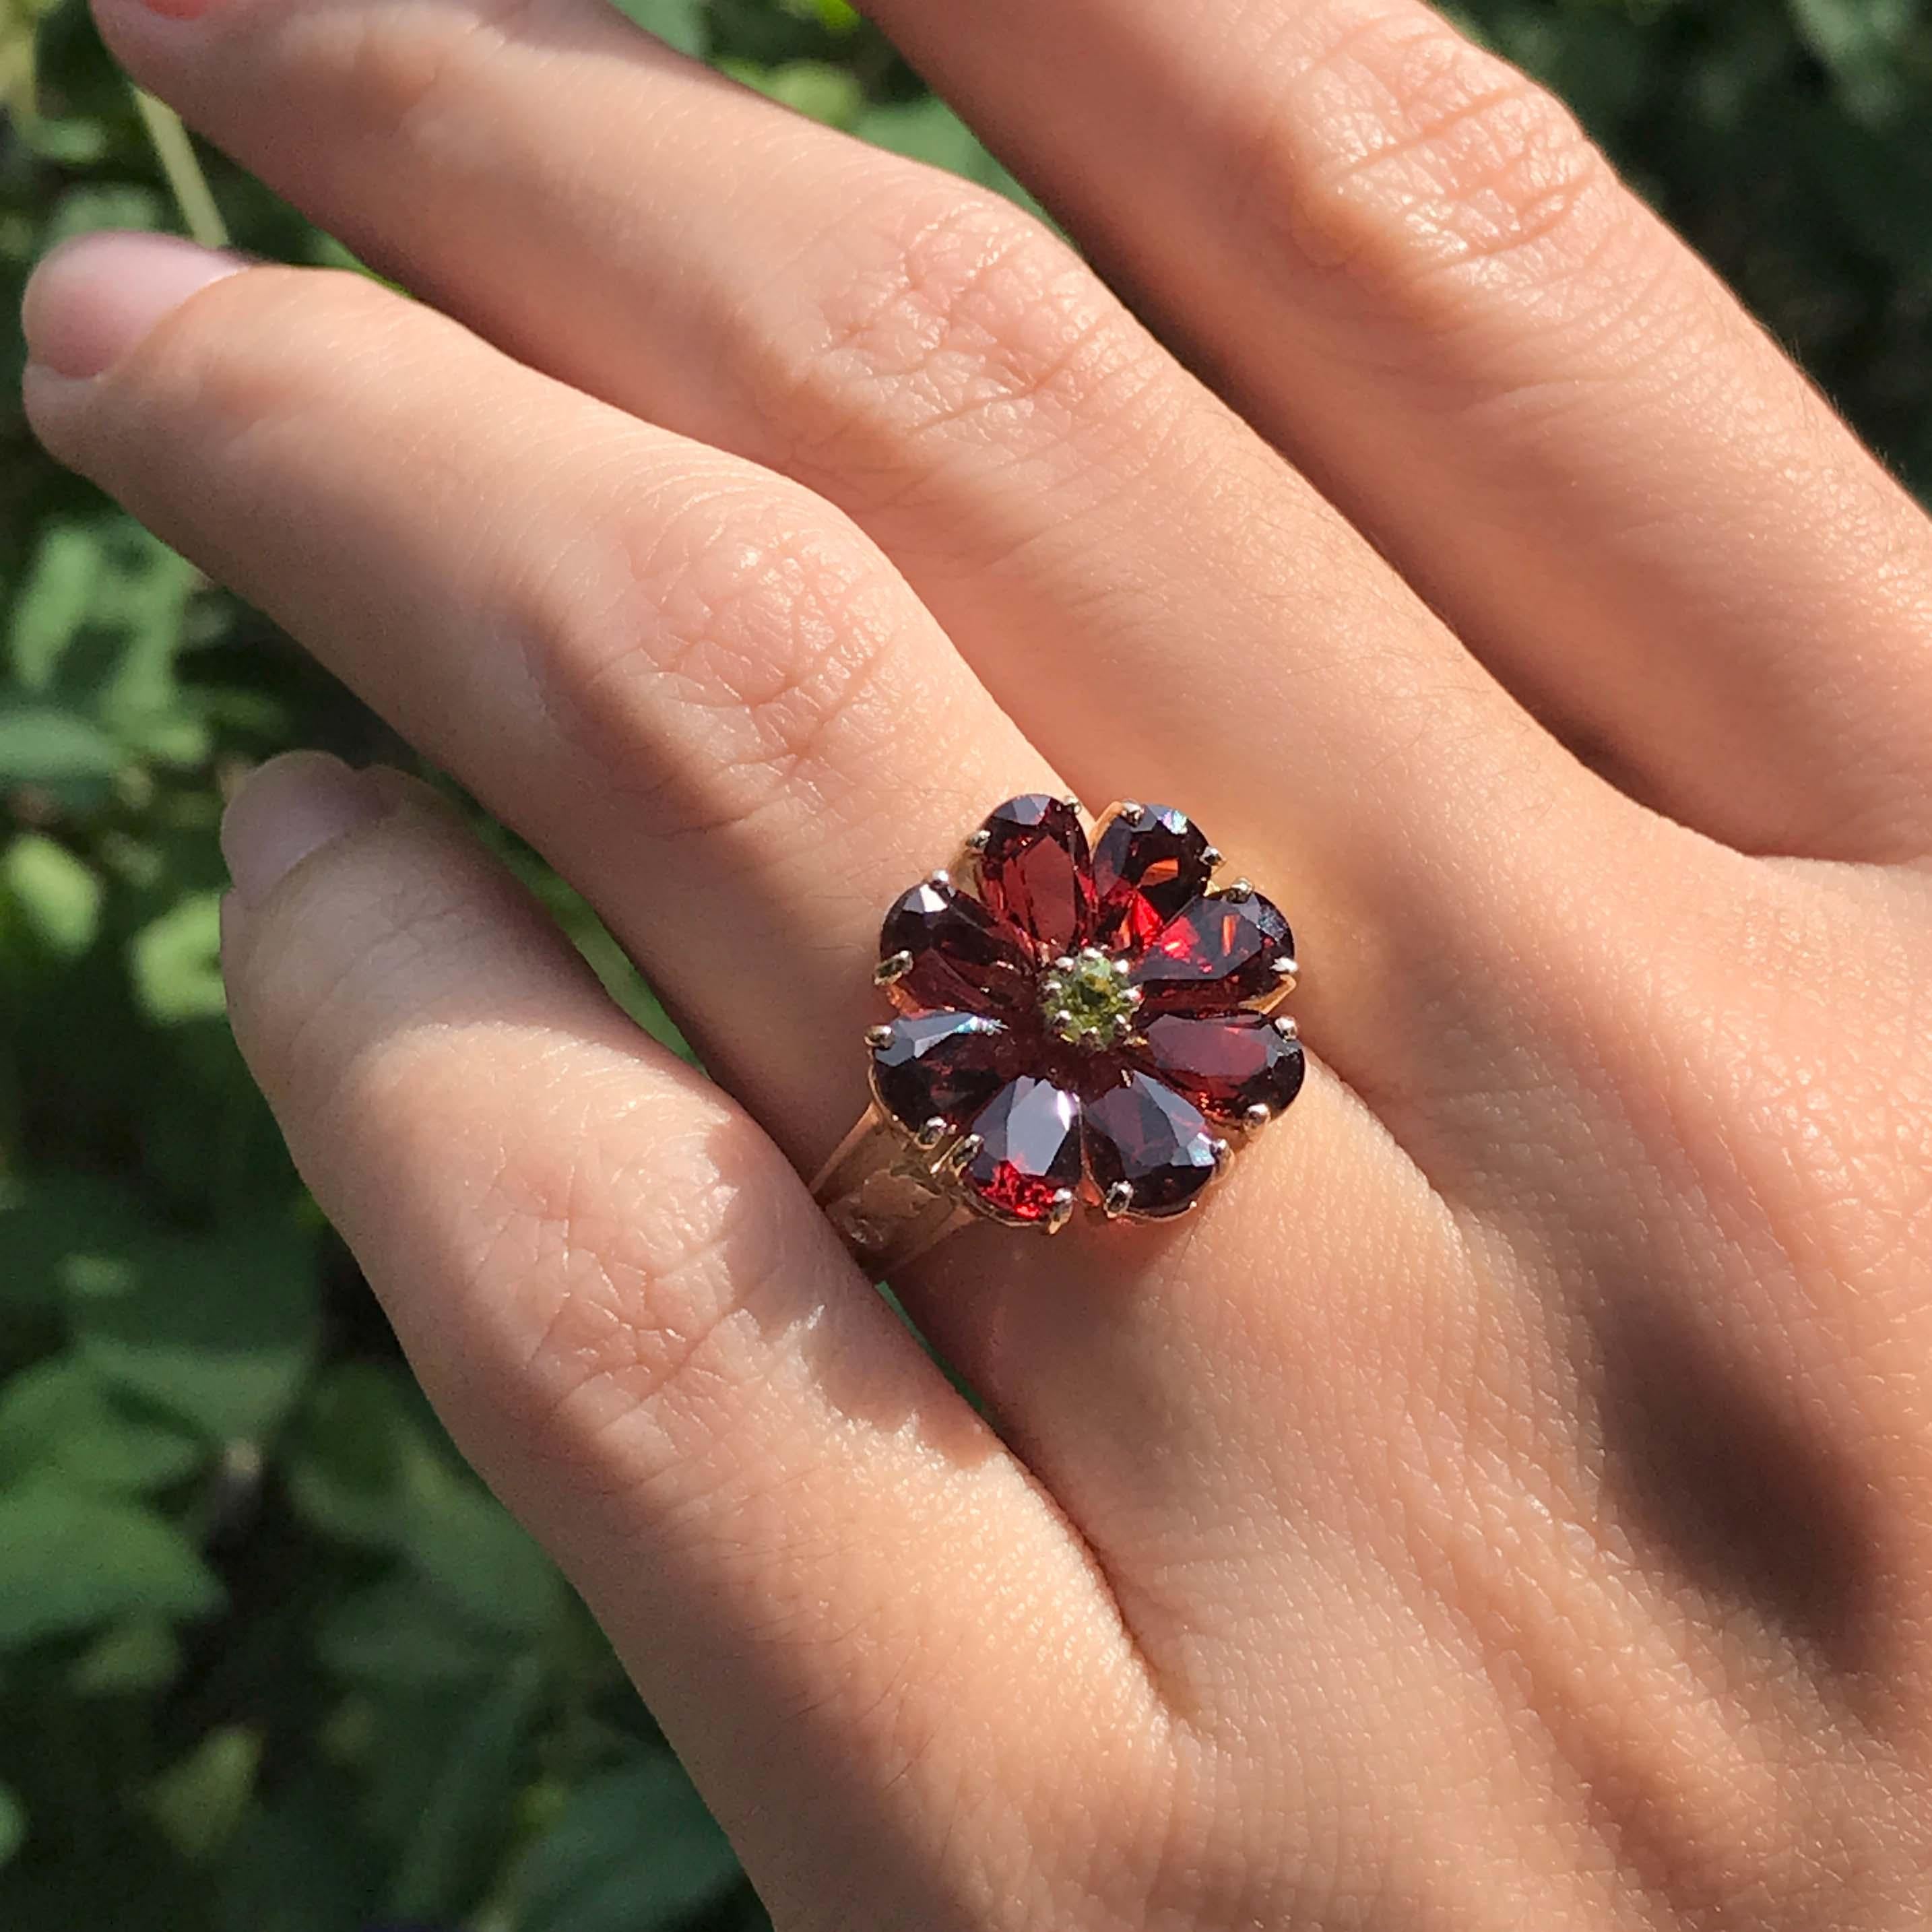 For Sale:  Vintage Style Natural Peridot and Garnet Flower Cluster Ring in 14K Yellow 3